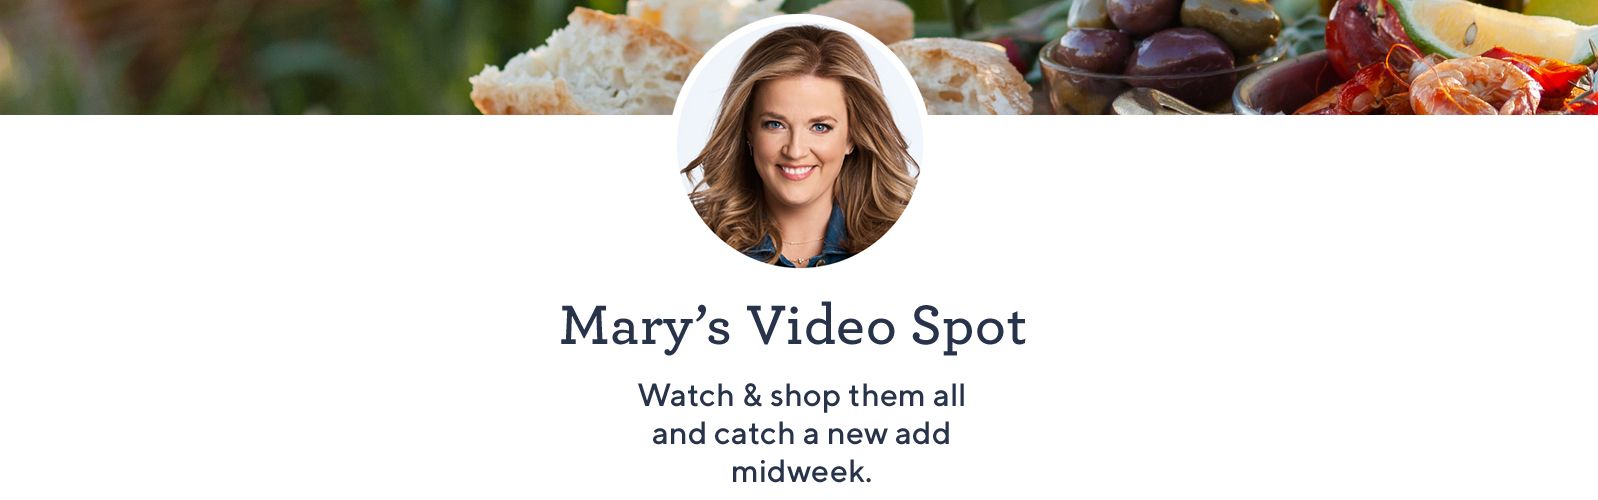 Mary's Video Spot. Watch & shop them all and catch a new add midweek.